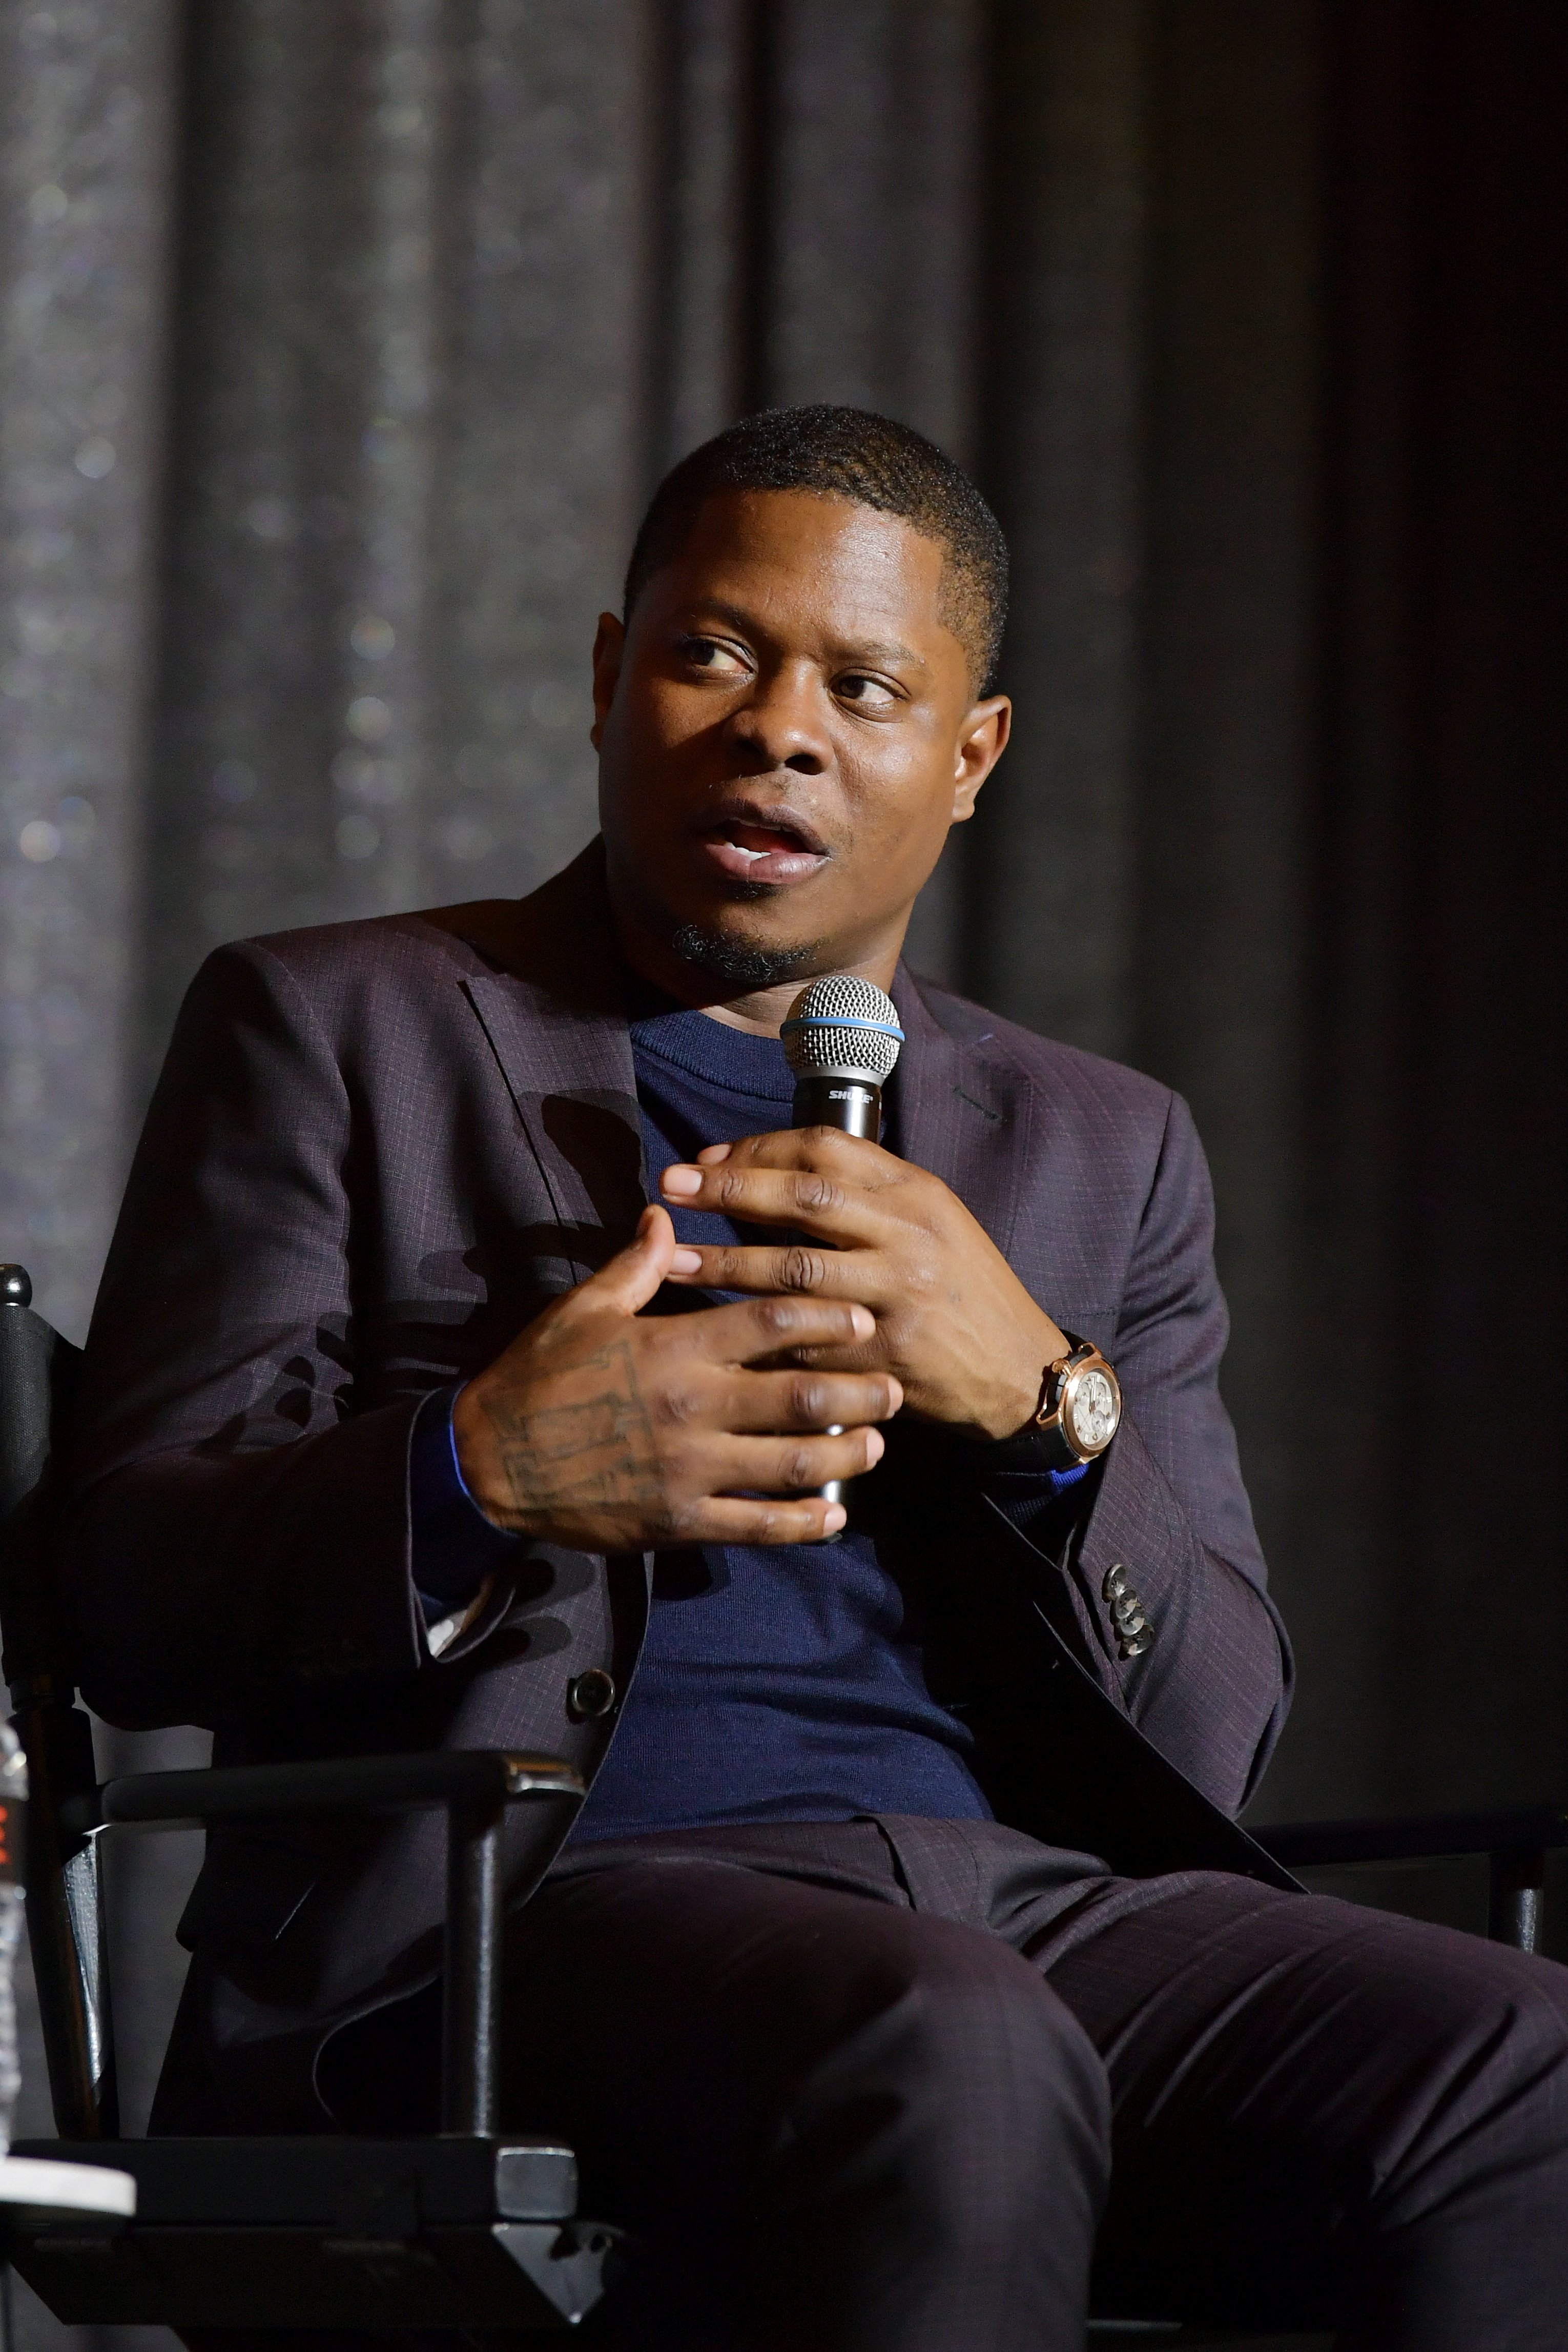 Jason Mitchell attends Showtime's "The Chi" For Your Consideration event on April 10, 2019. | Photo: GettyImages